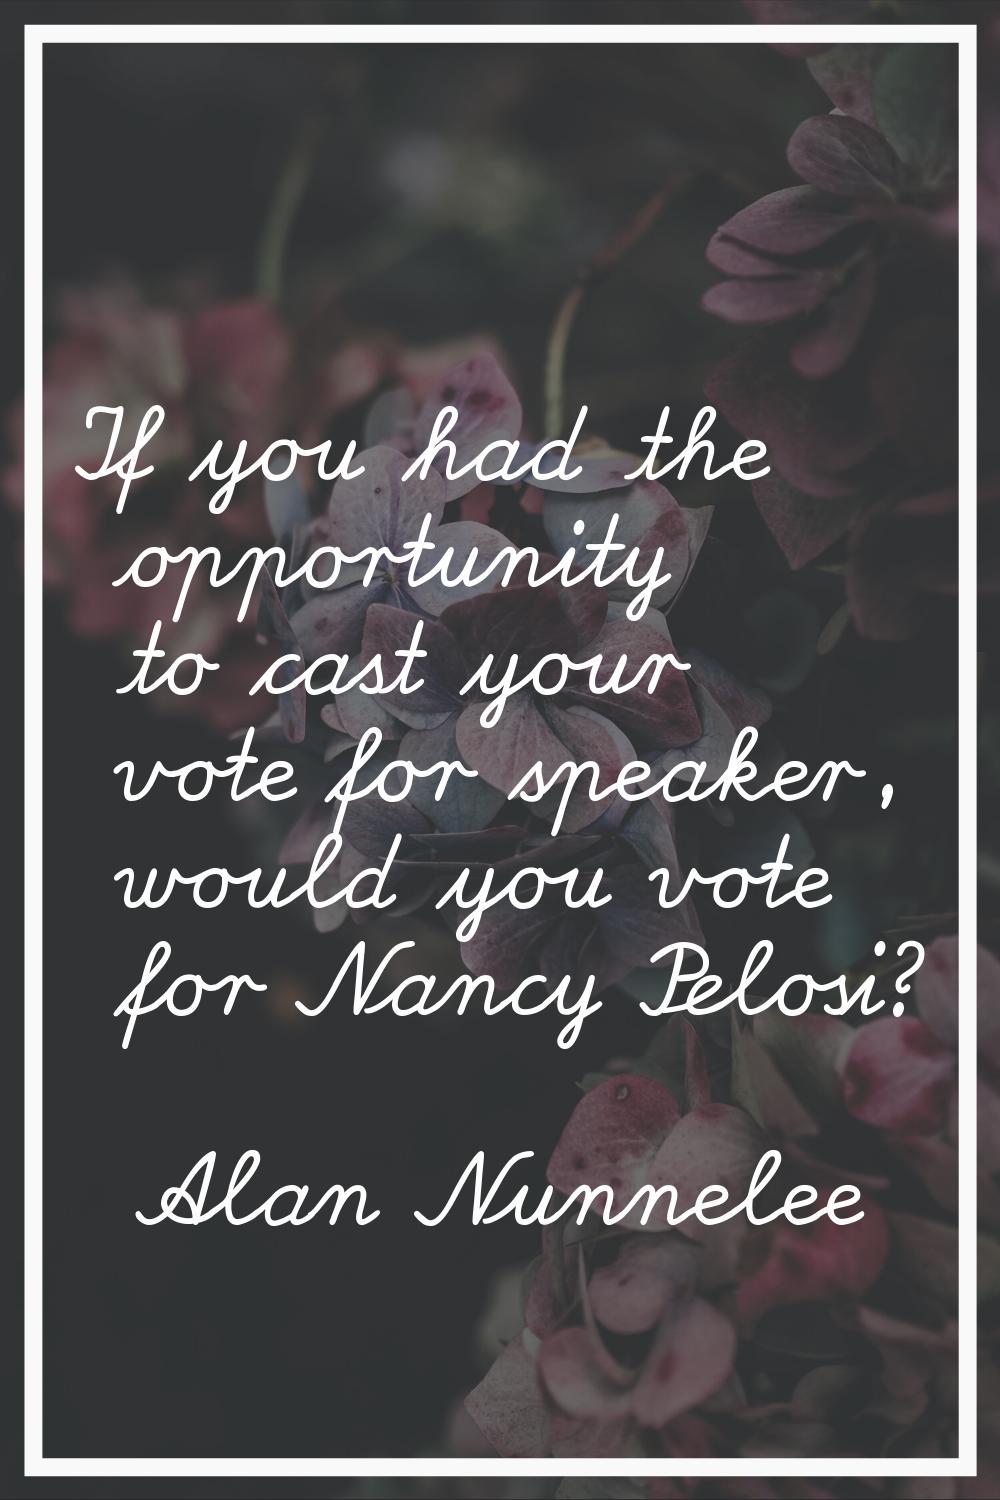 If you had the opportunity to cast your vote for speaker, would you vote for Nancy Pelosi?